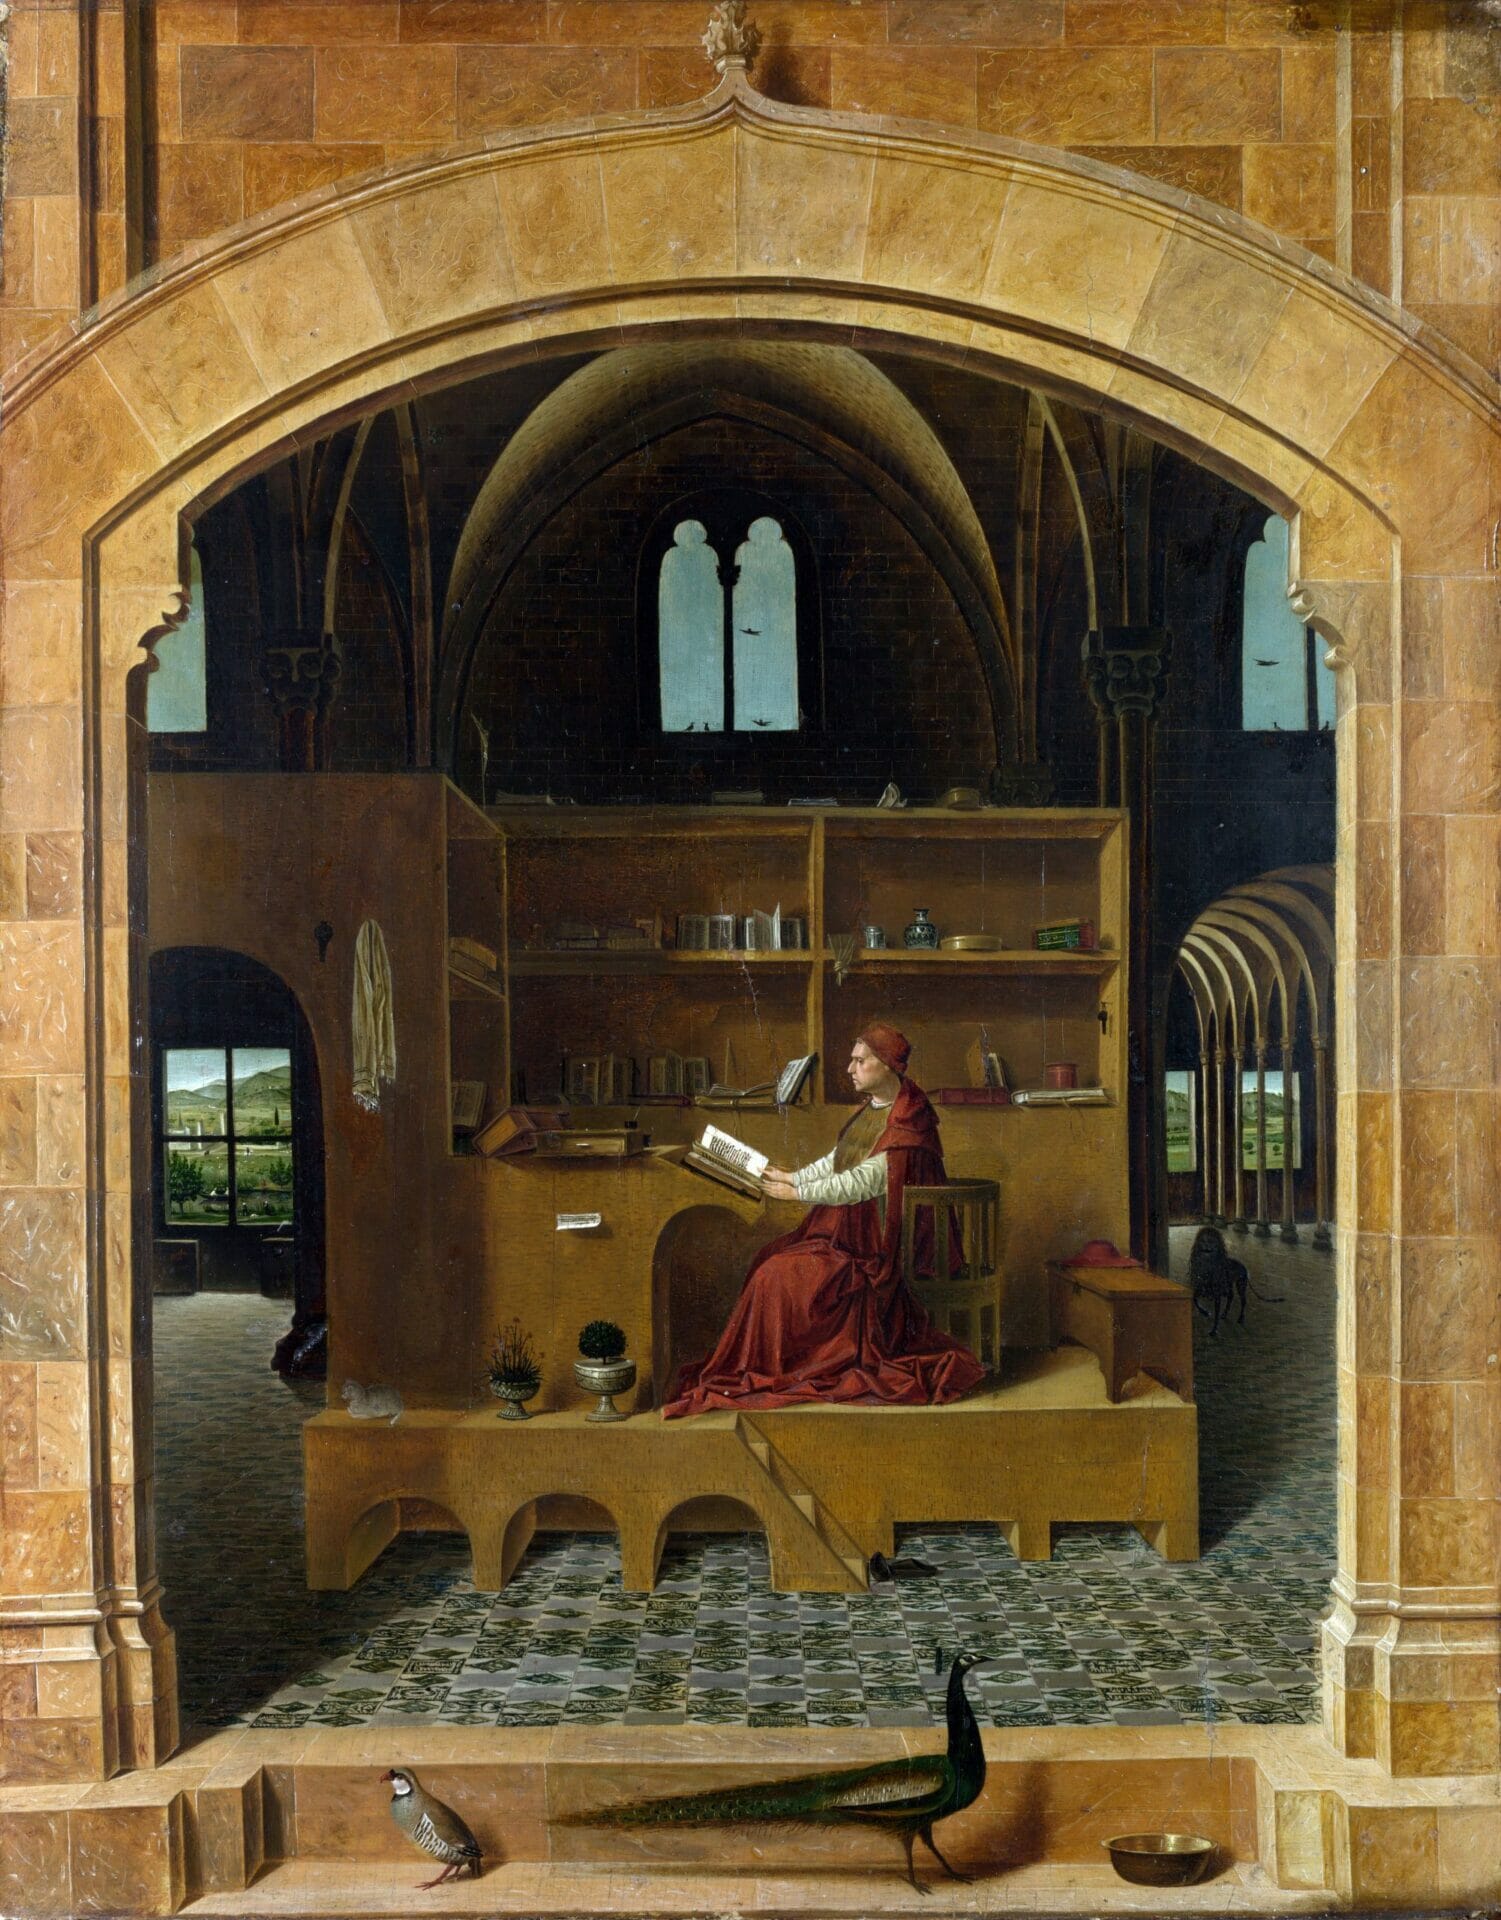 Saint Jerome in his study | A new humanist iconography